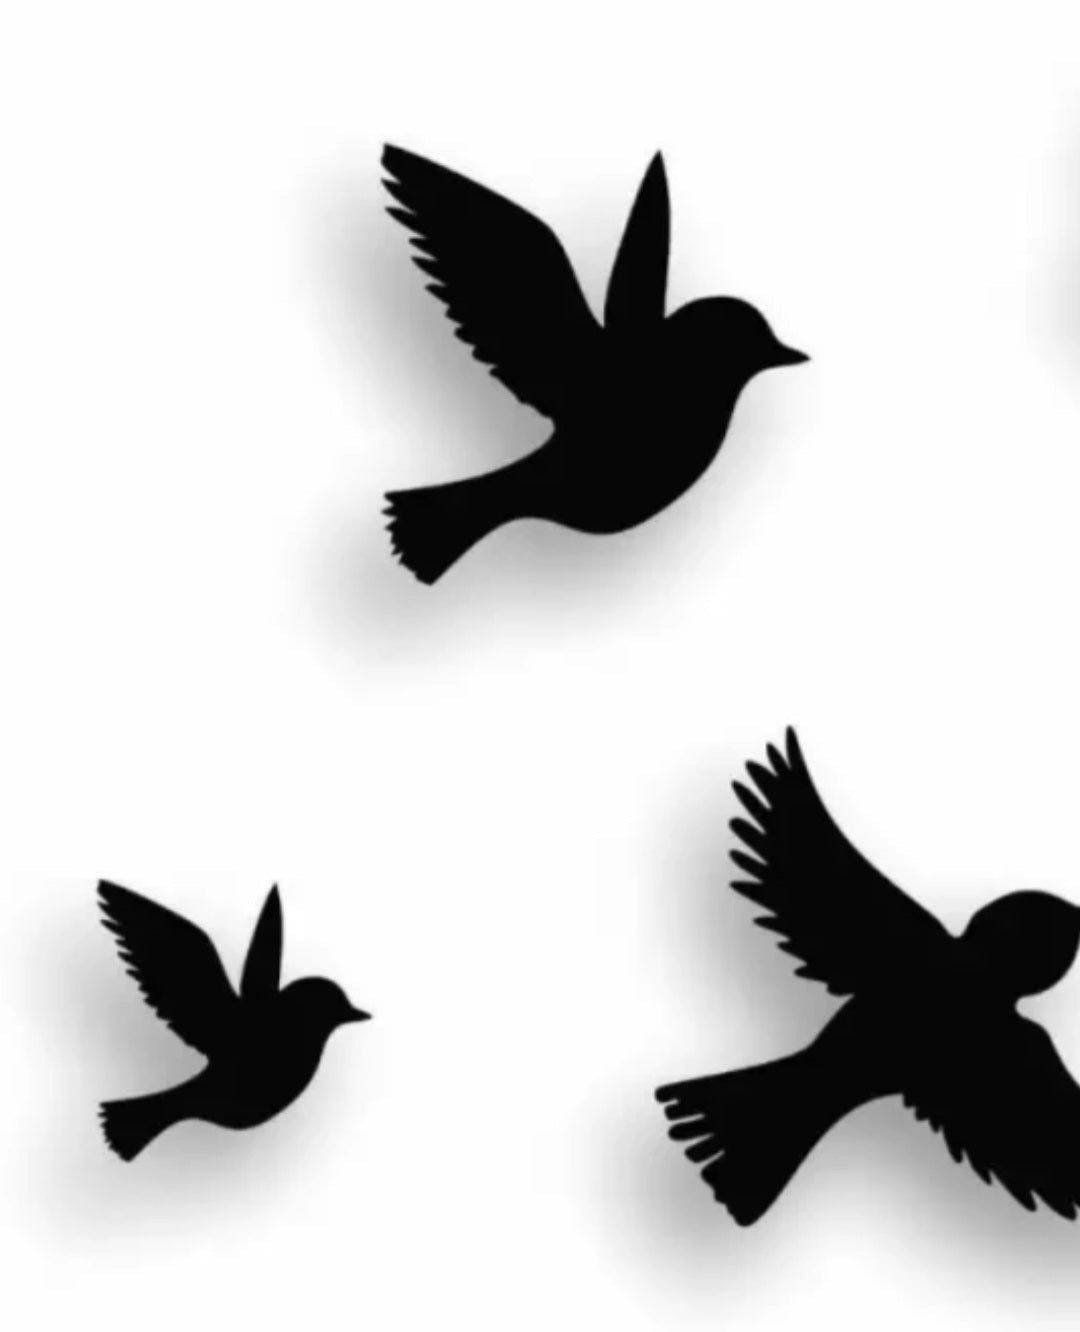 6 Flying Bird Decoration for Wall, Home and Bedroom Decorations